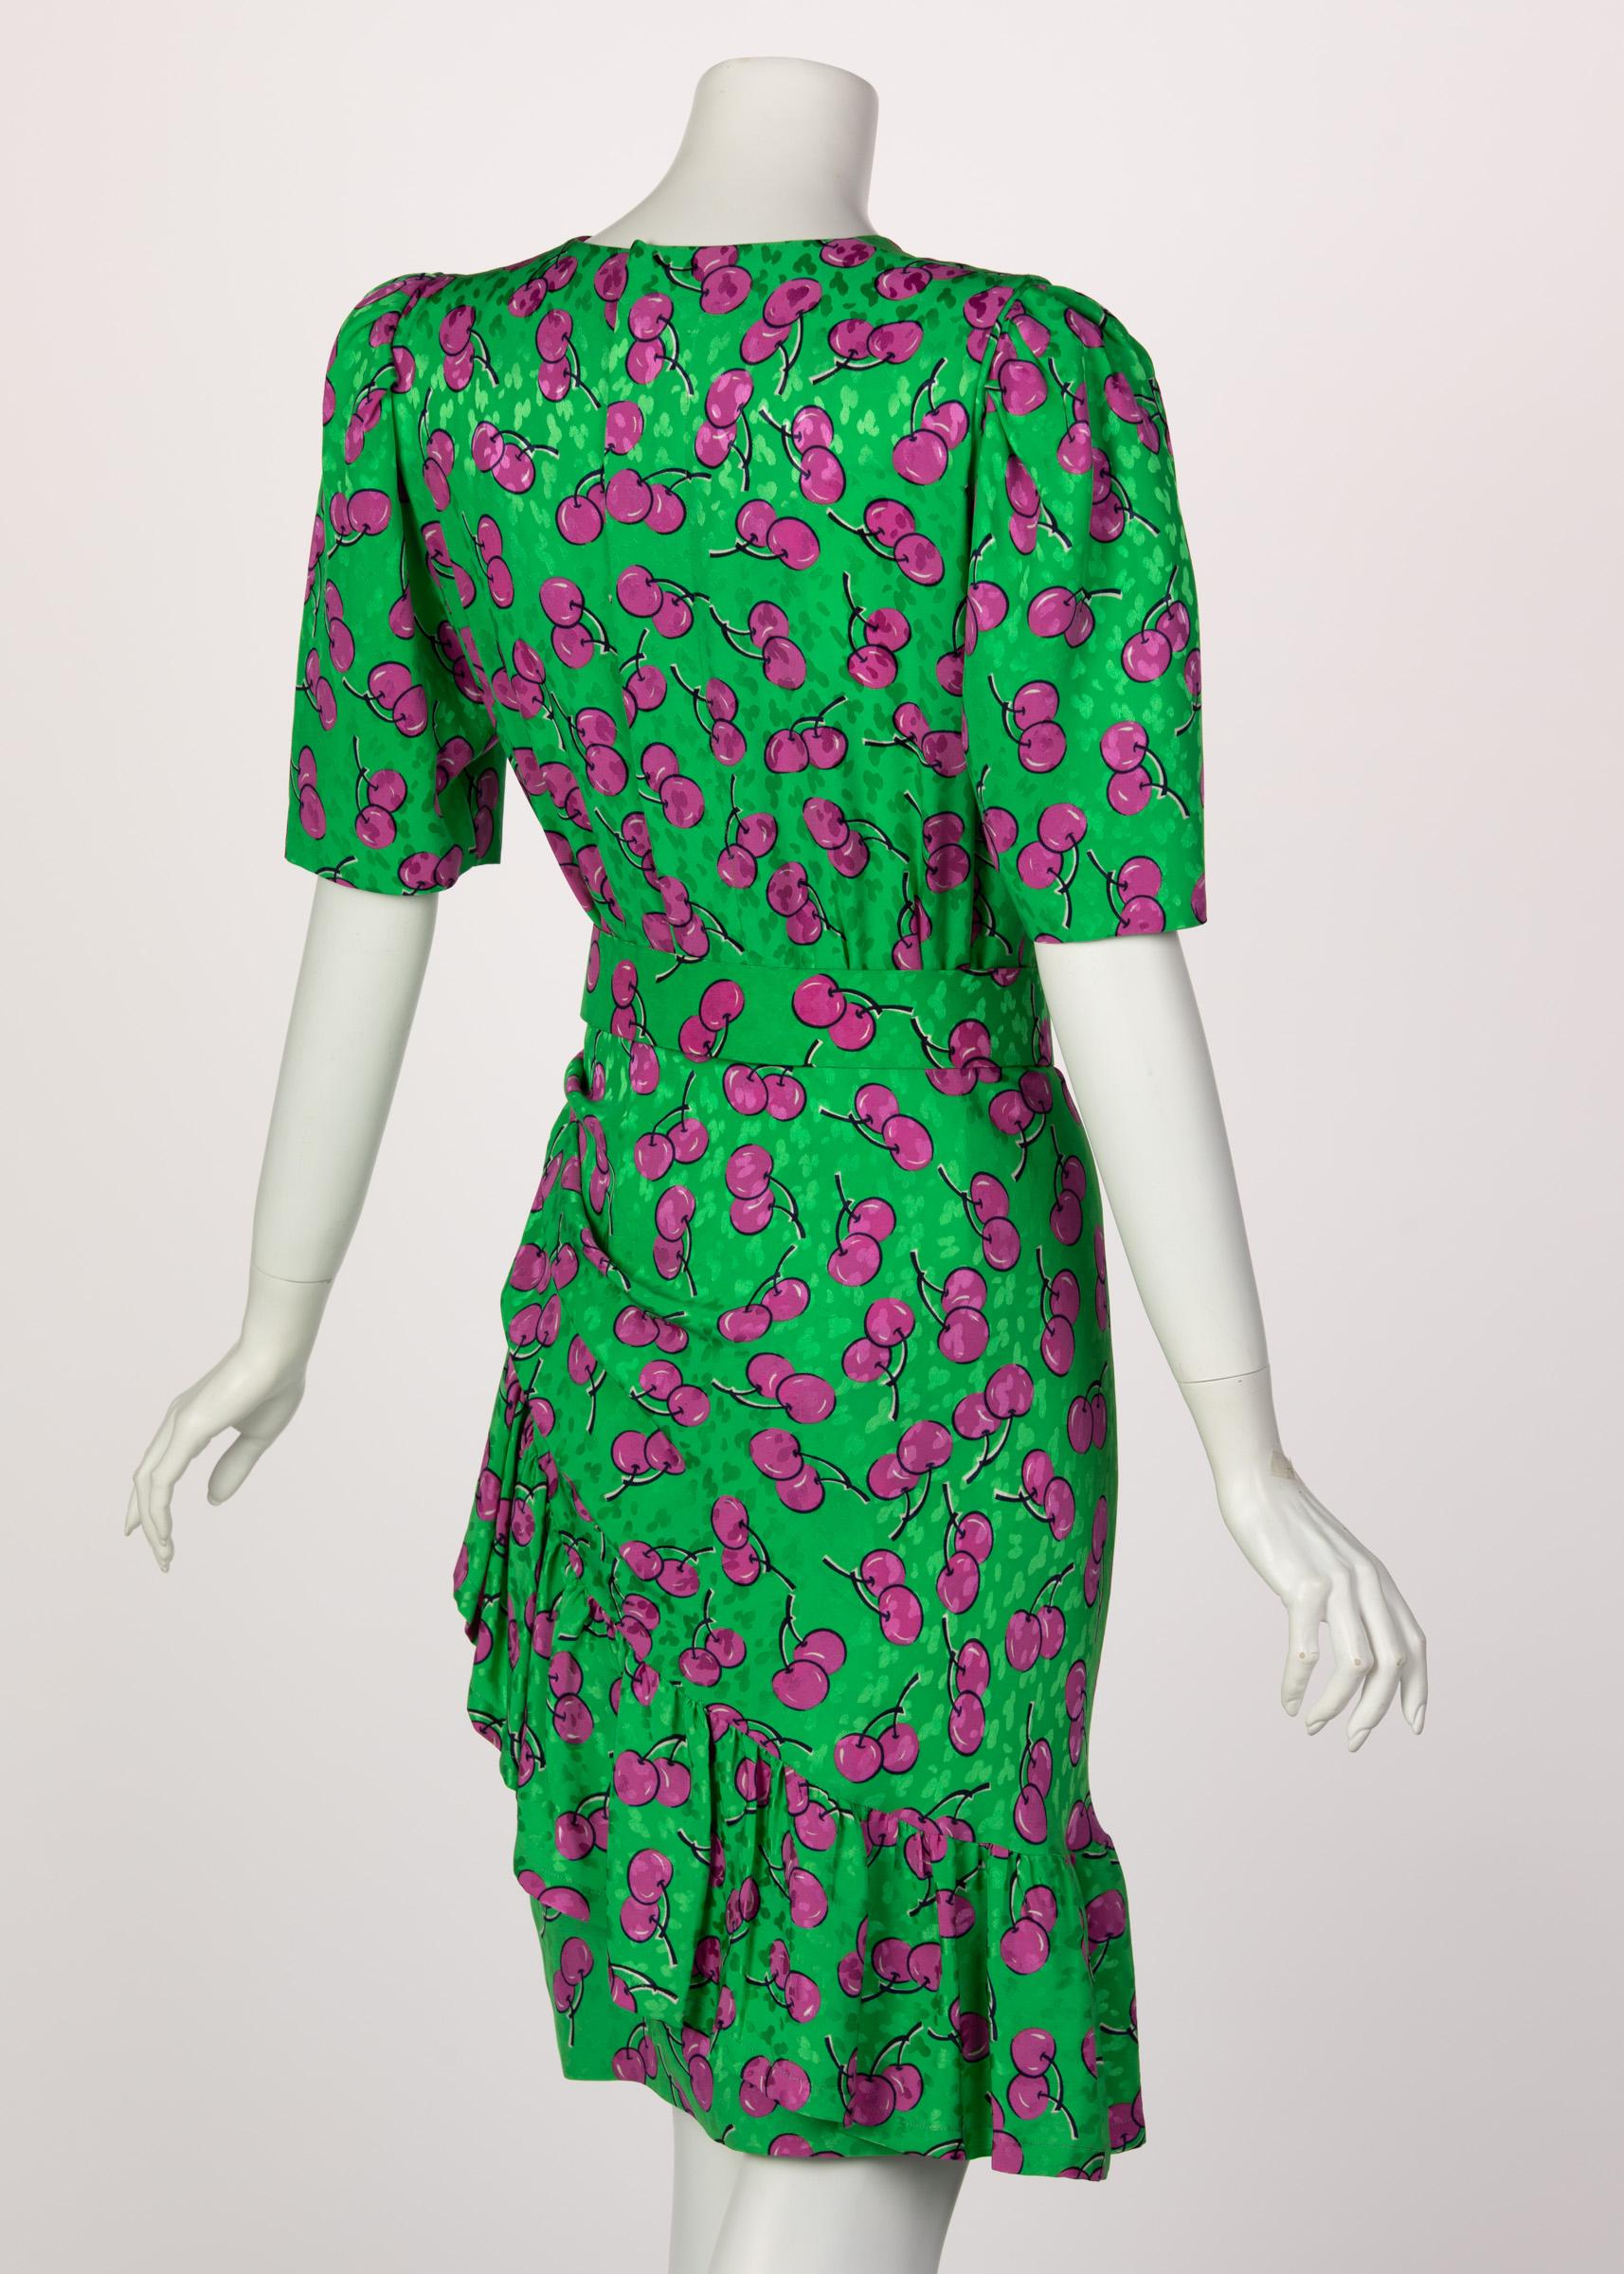 Givenchy Silk Green Cherry Print Cocktail Dress, 1980s In Excellent Condition For Sale In Boca Raton, FL